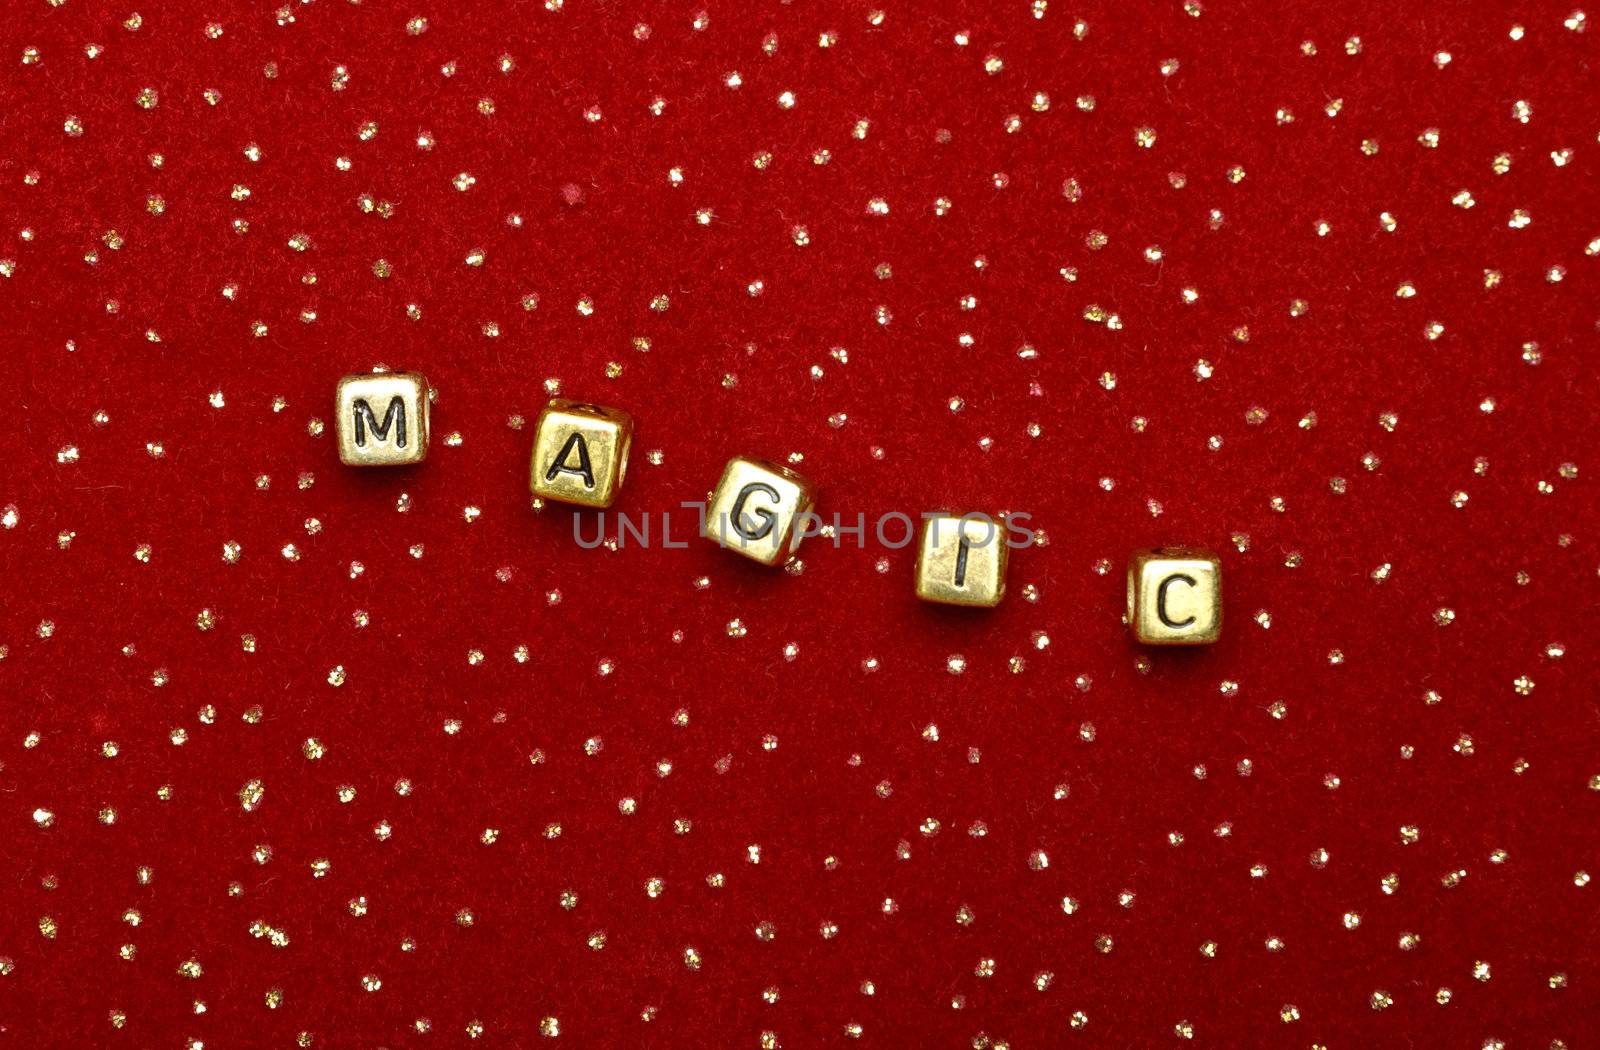 the word "magic" of beads on a red velvet with sequins by Discovod